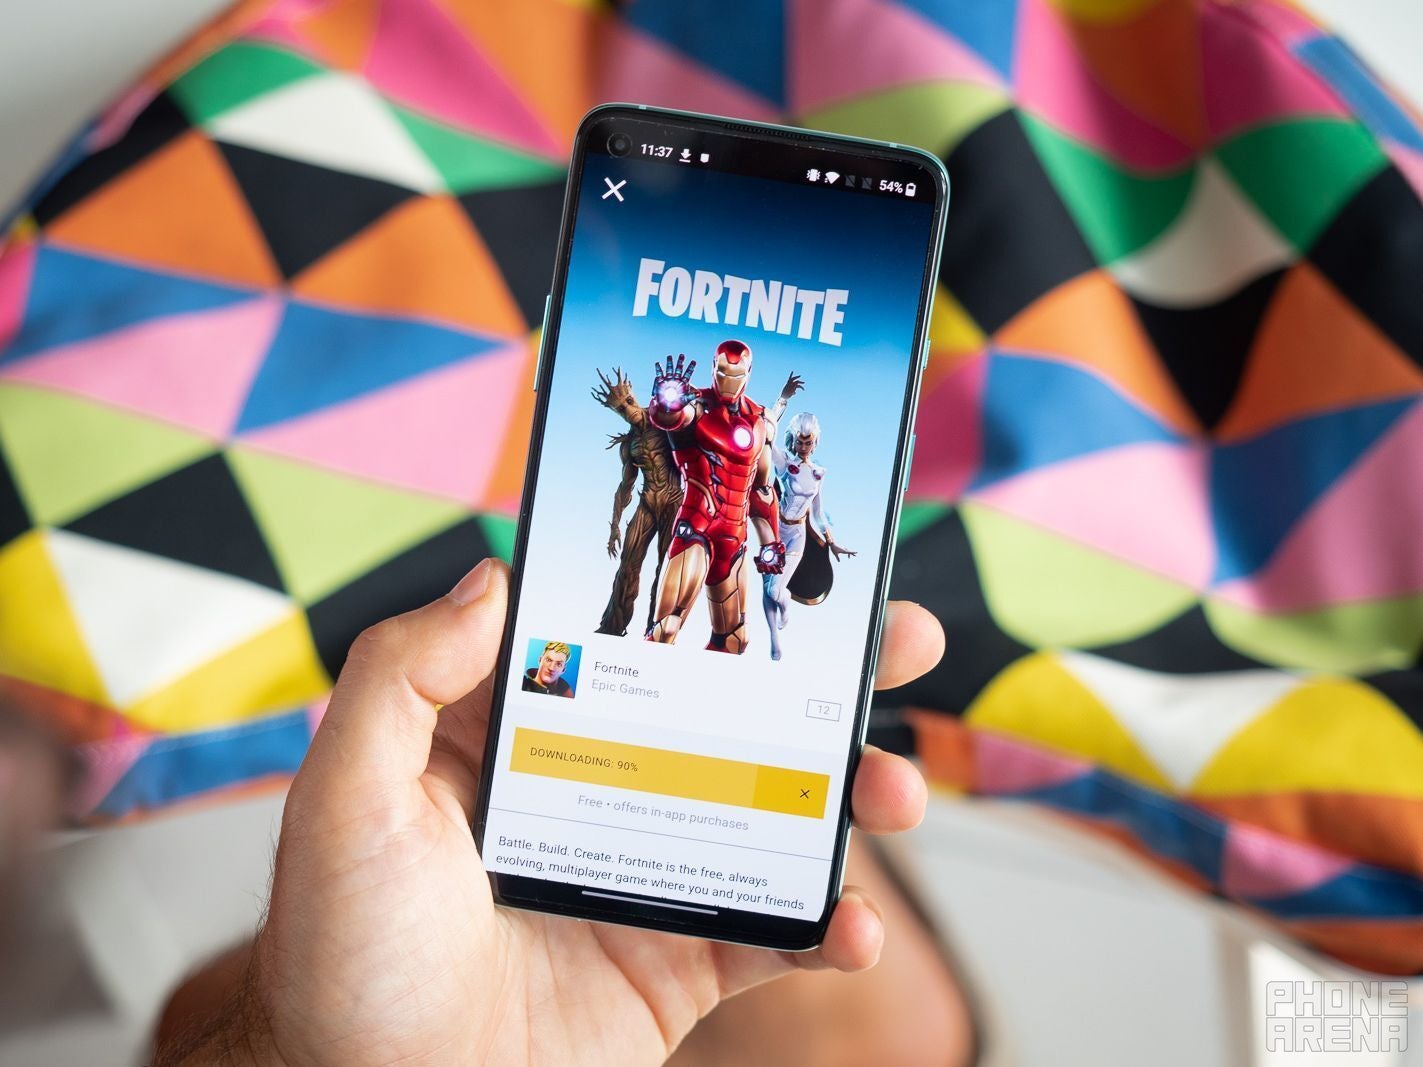 Is it too early to say that Fortnite is coming back to the Play Store in India? - Google to make these major changes to Play Store in India to comply with law